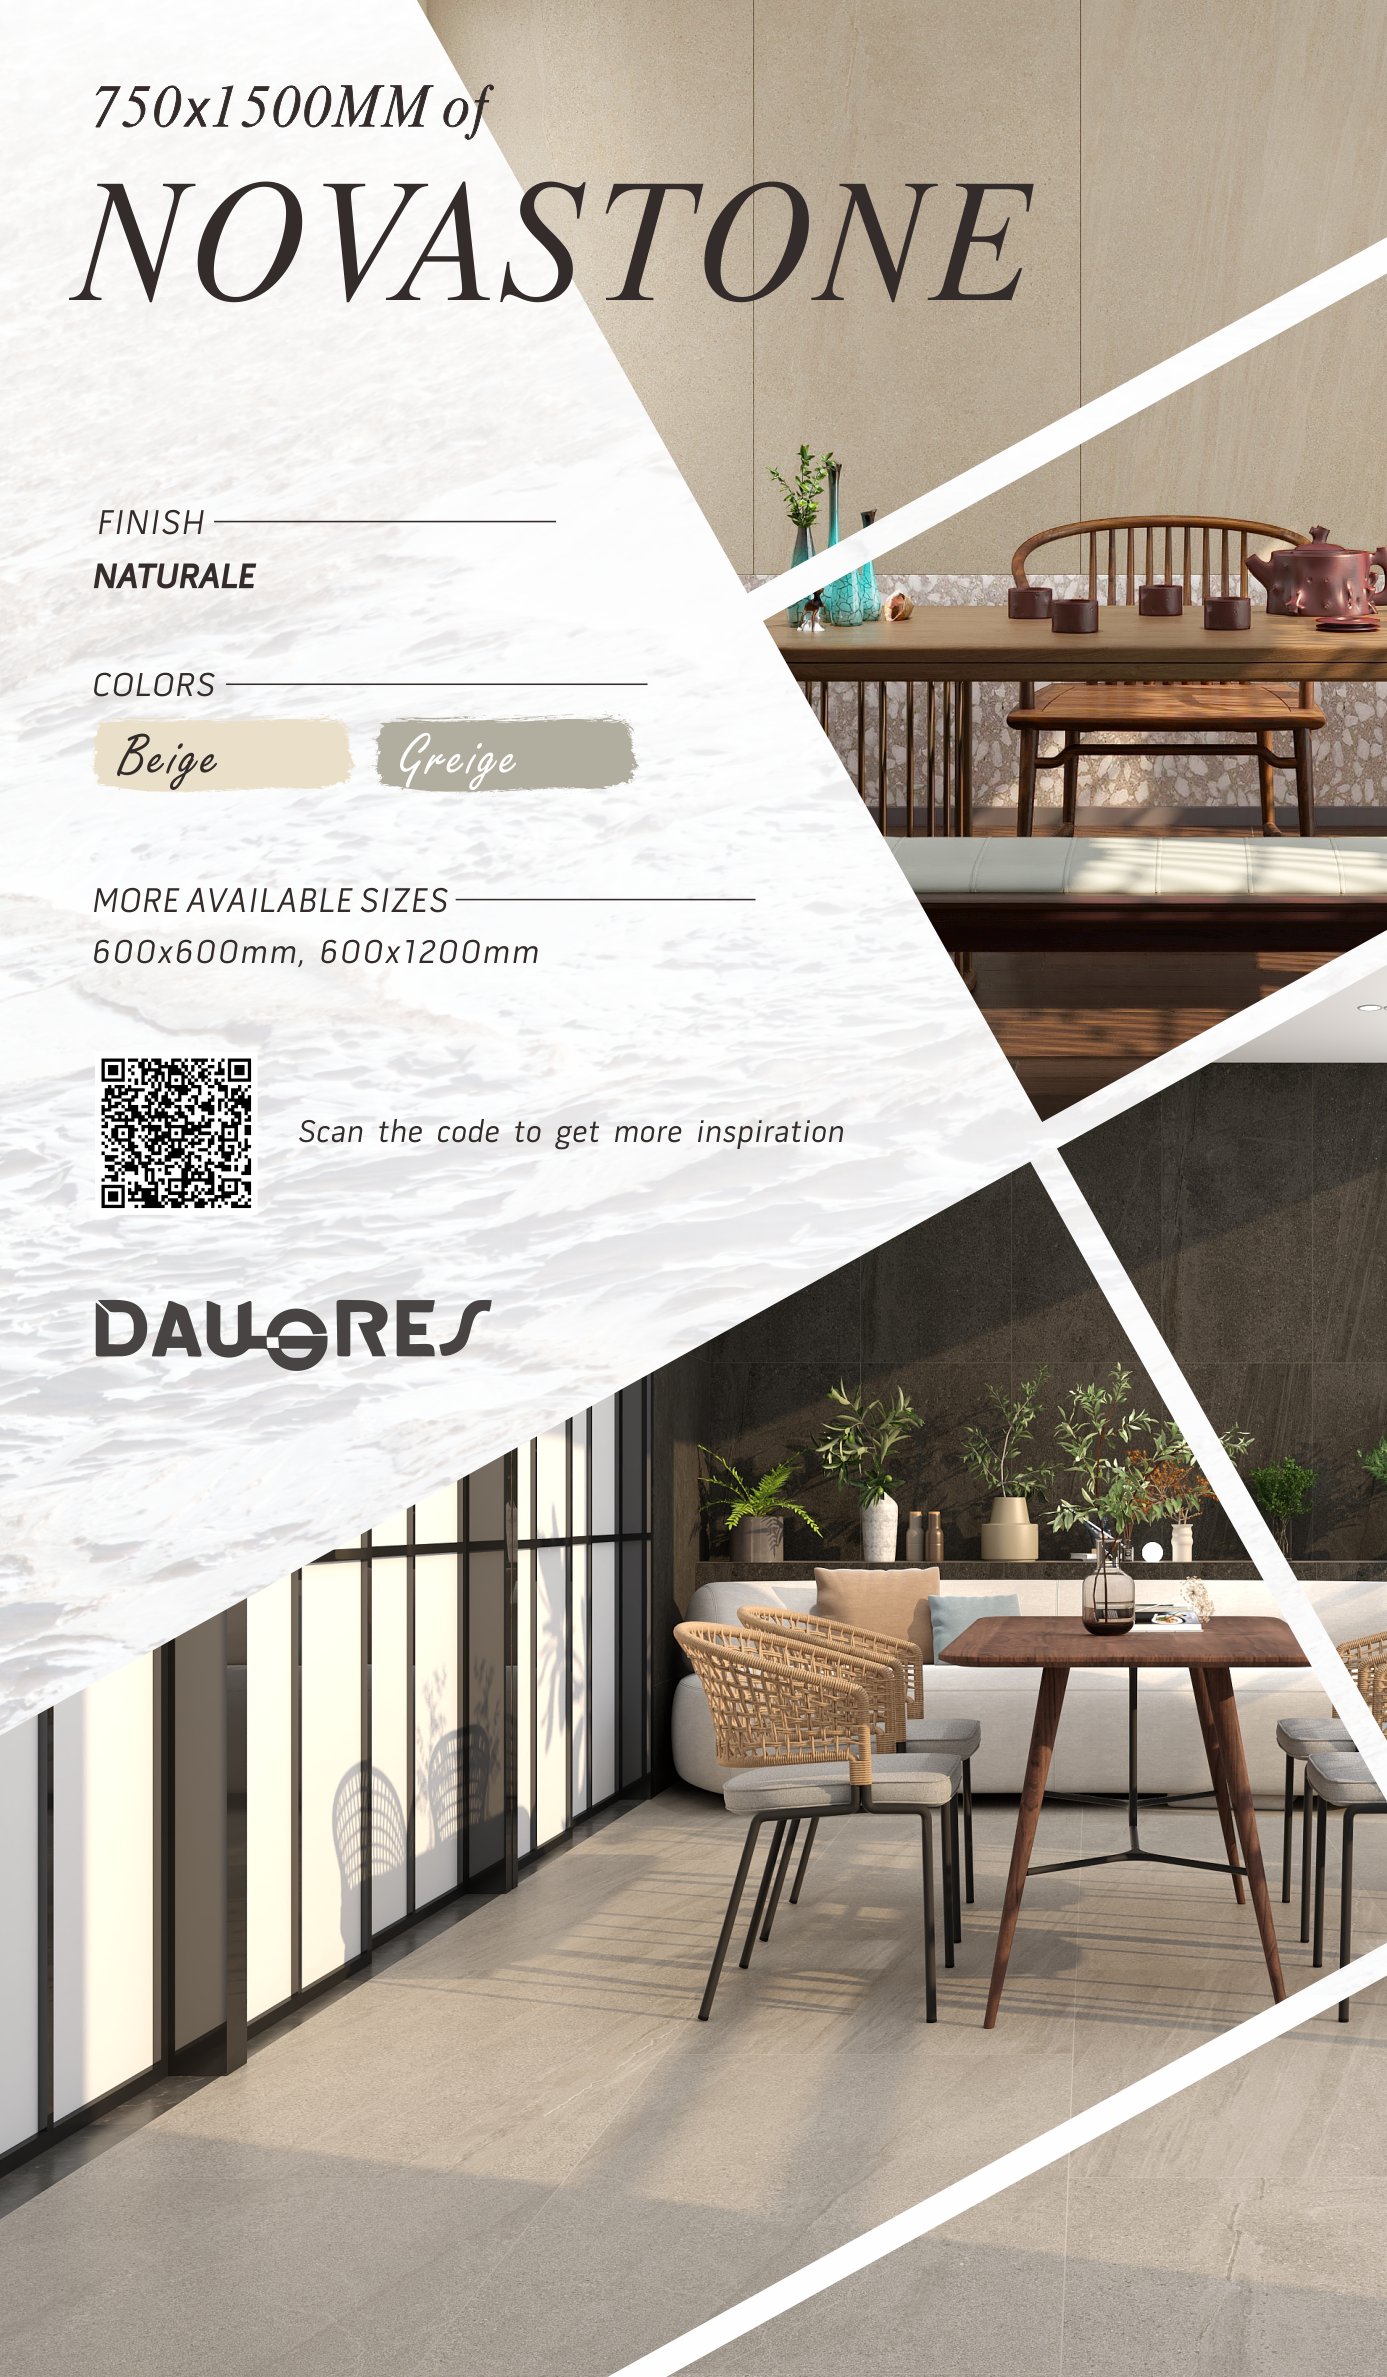 Daugres International Sales Center on X: COLLECTION UPGRADE  750X1500MM  of NOVASTONE Materialise the marks left by wind & rain, show the marvelous  side of nature. #TILE #PORCELAIN #INTERIORDESIGN #ITALIANDESIGN #750X1500MM  #floortile #